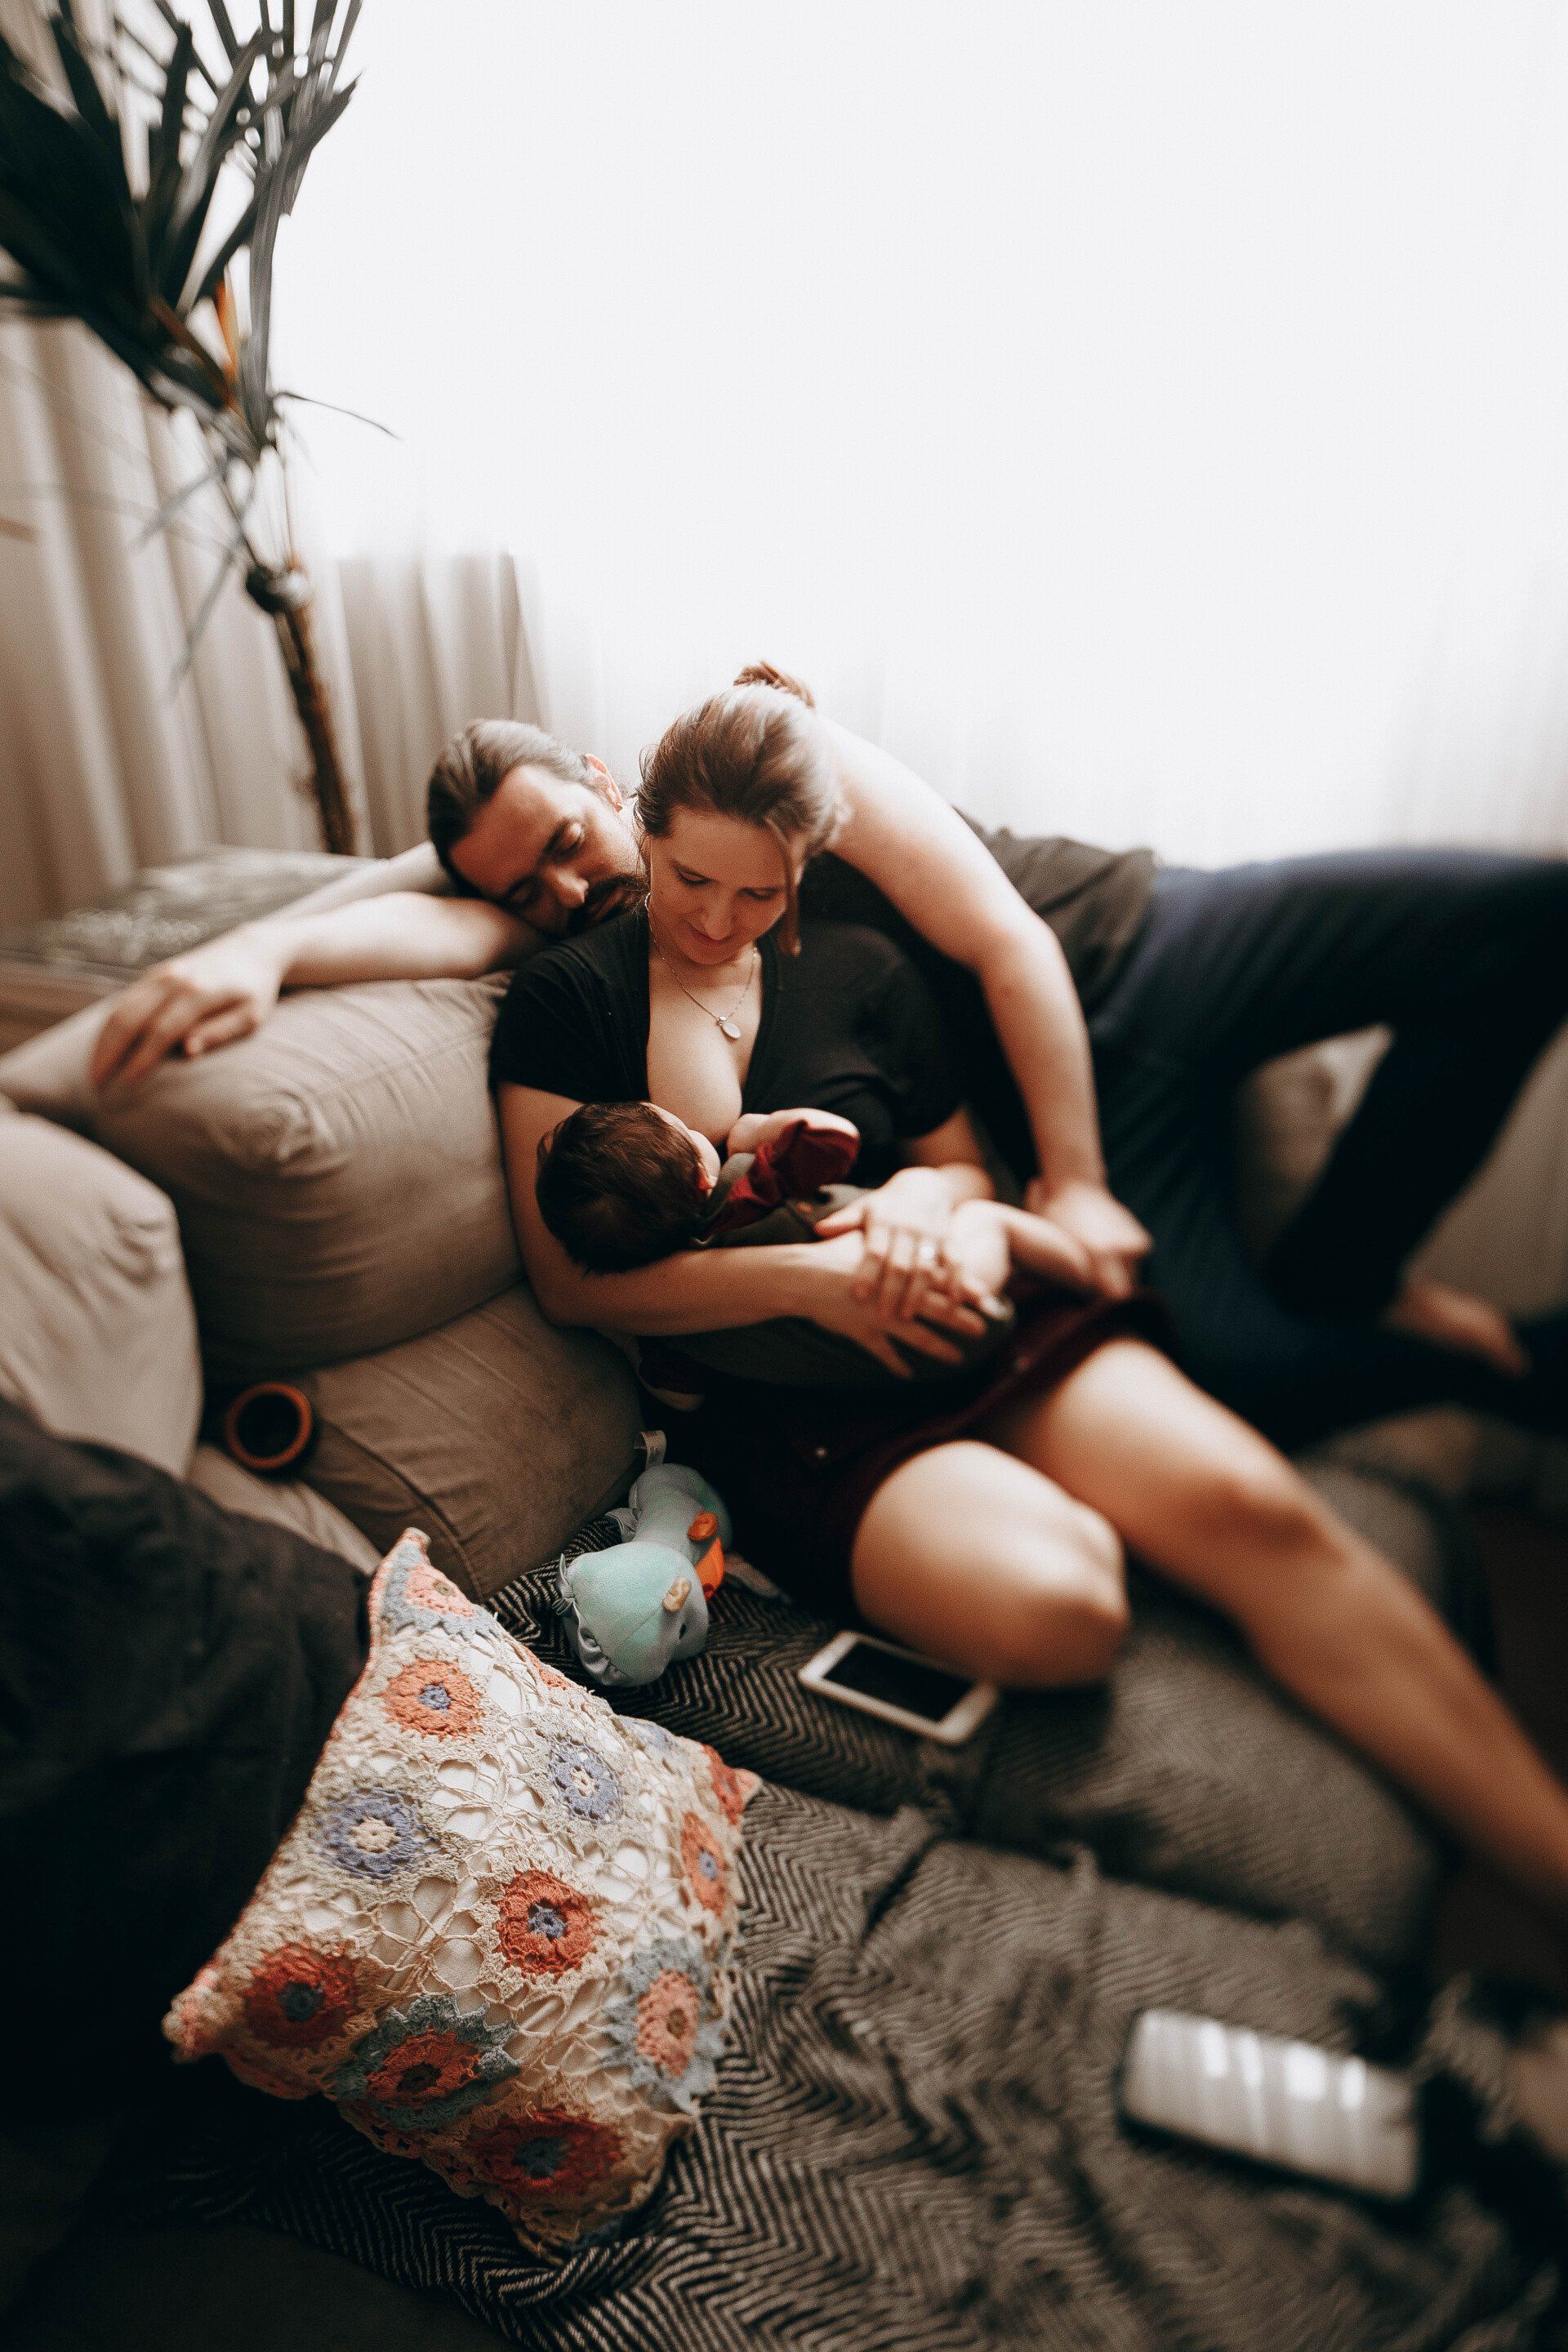 Mom and Dad on couch as mom breastfeeds newborn